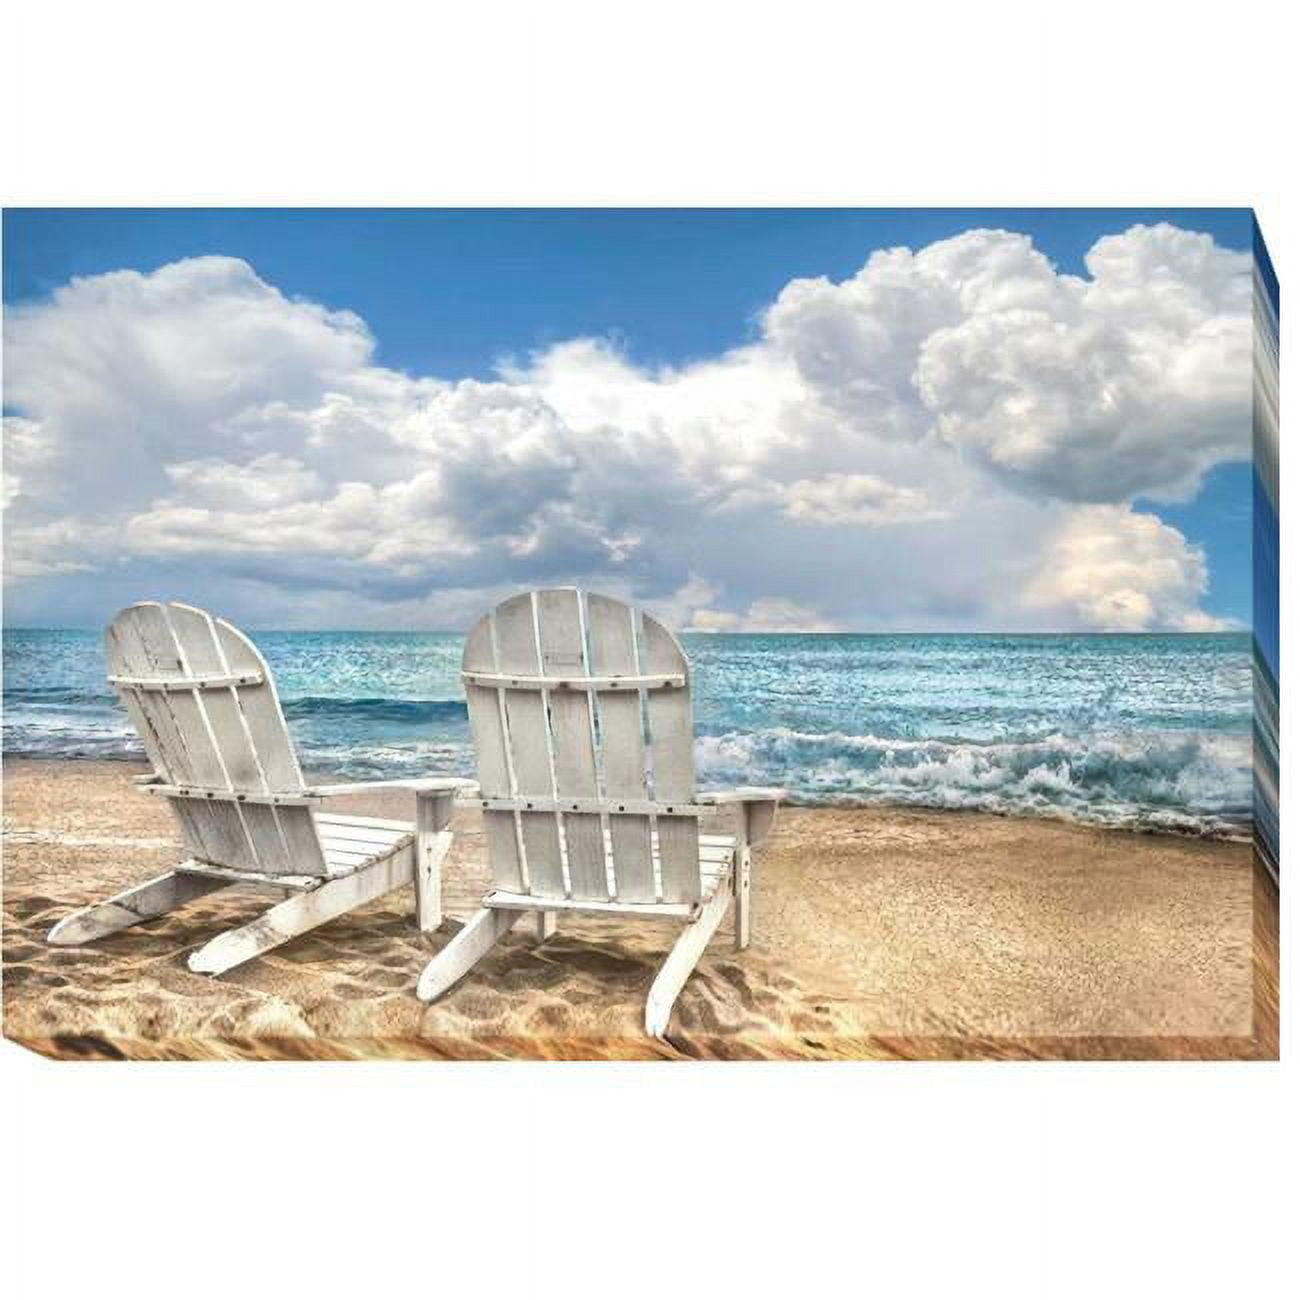 2436s483cg Island Attitude By Celebrate Life Gallery Premium Gallery-wrapped Canvas Giclee Art - Ready-to-hang, 24 X 36 X 1.5 In.